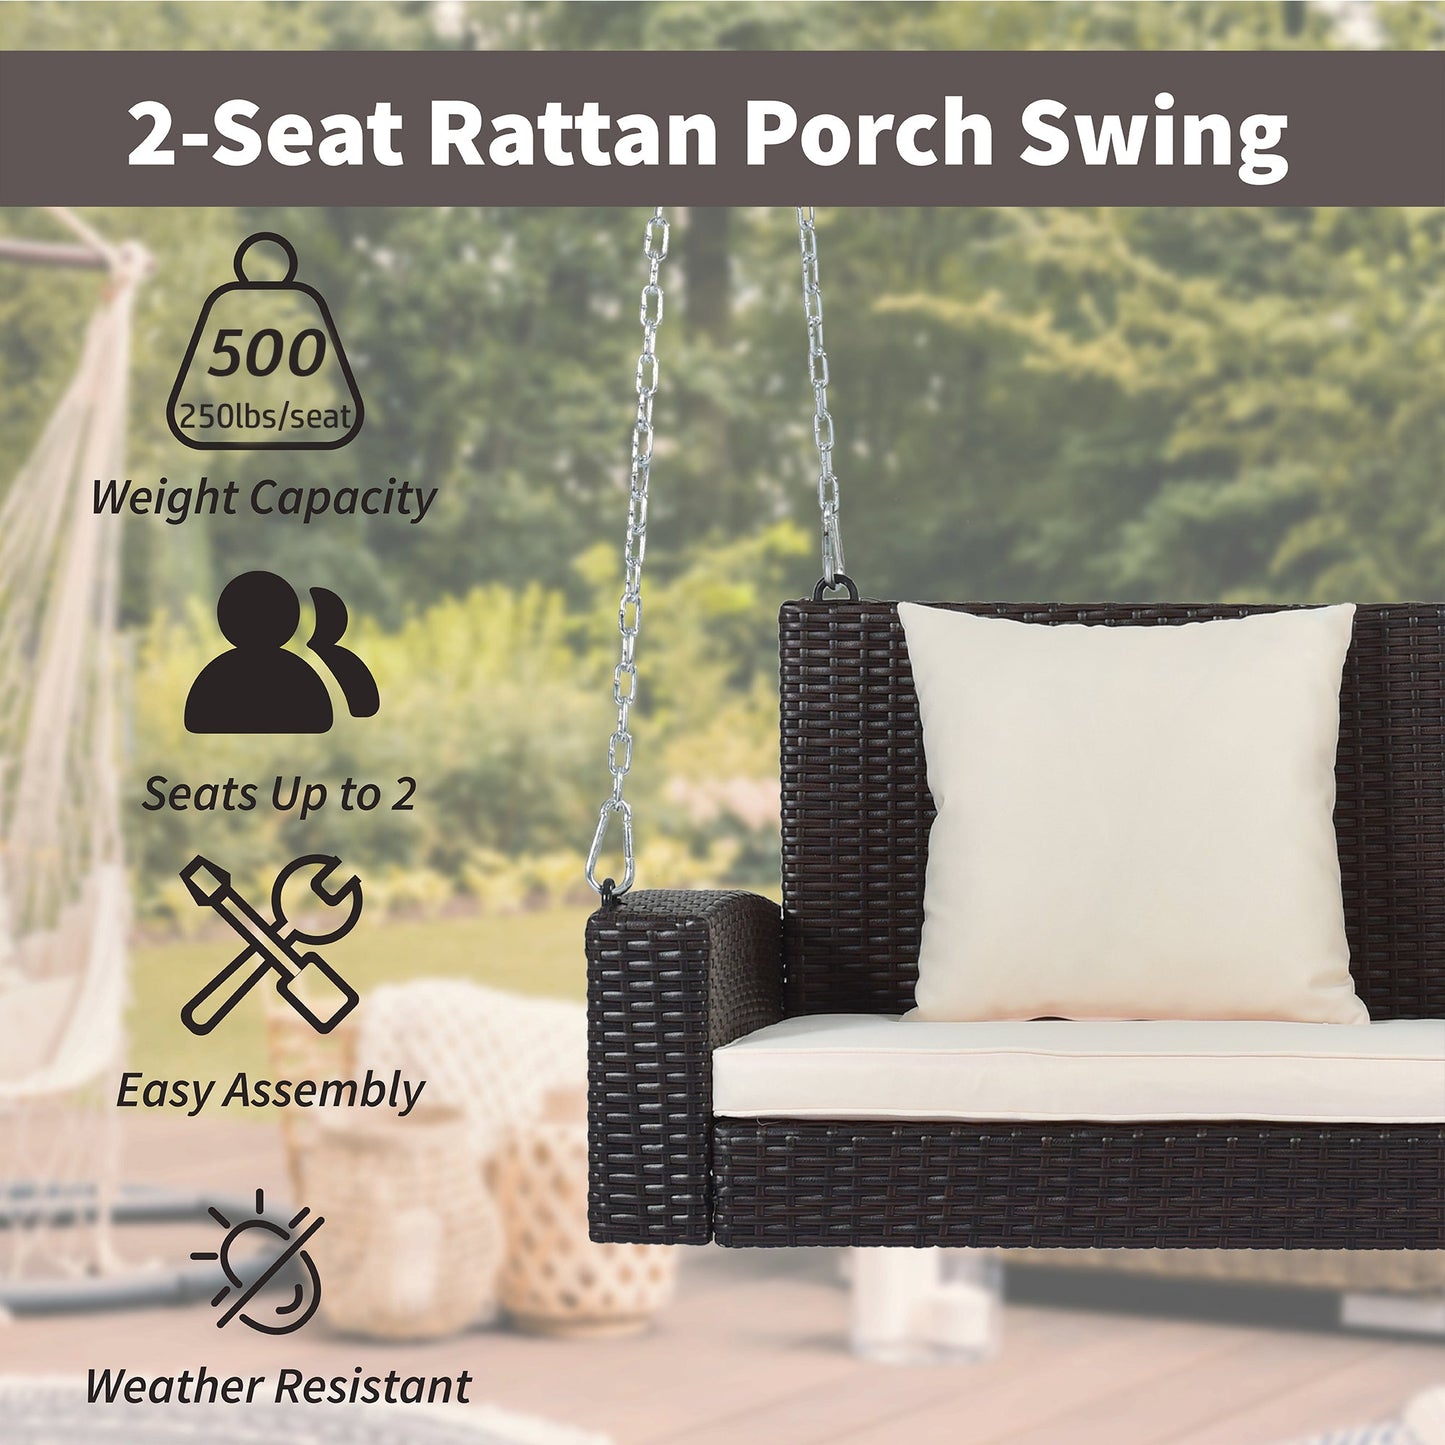 GO 2-Person Wicker Hanging Porch Swing with Chains, Cushion, Pillow, Rattan Swing Bench for Garden, Backyard, Pond. (Brown Wicker, Beige Cushion)-12